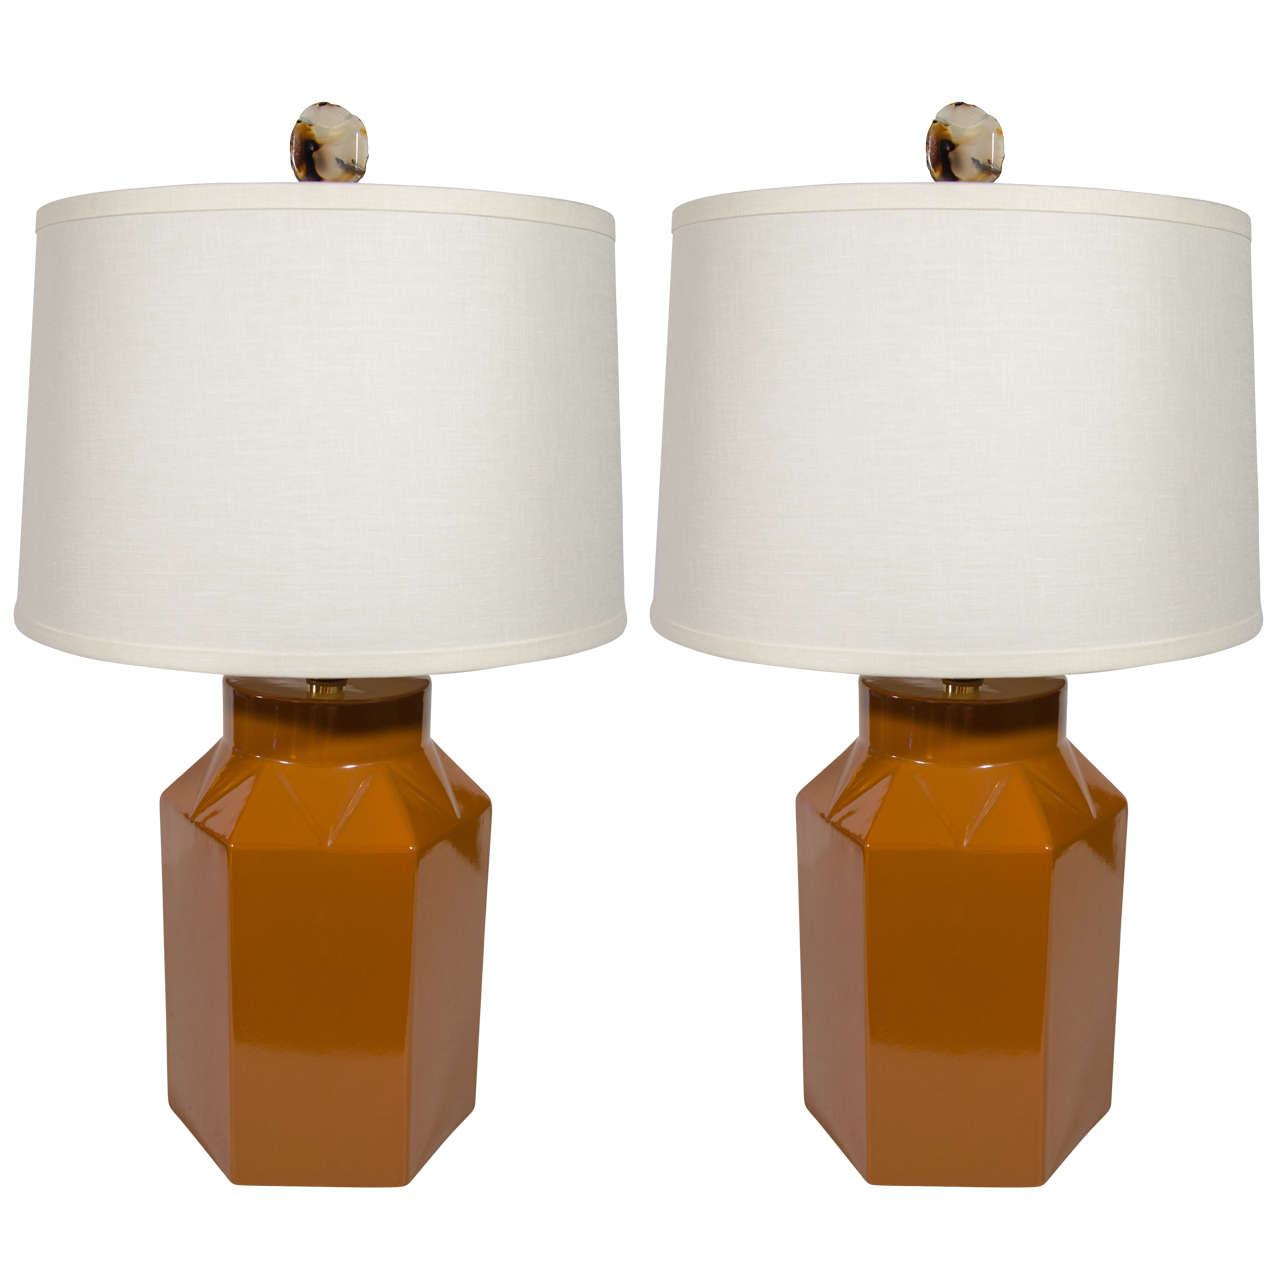 Pair of midcentury ceramic lamps with modernist hexagon forms. The lamps have a striking glazed finish in cognac. They feature faceted triangular details along the tops, reminiscent of Machine Age era design. The lamps have brass stem fittings, and